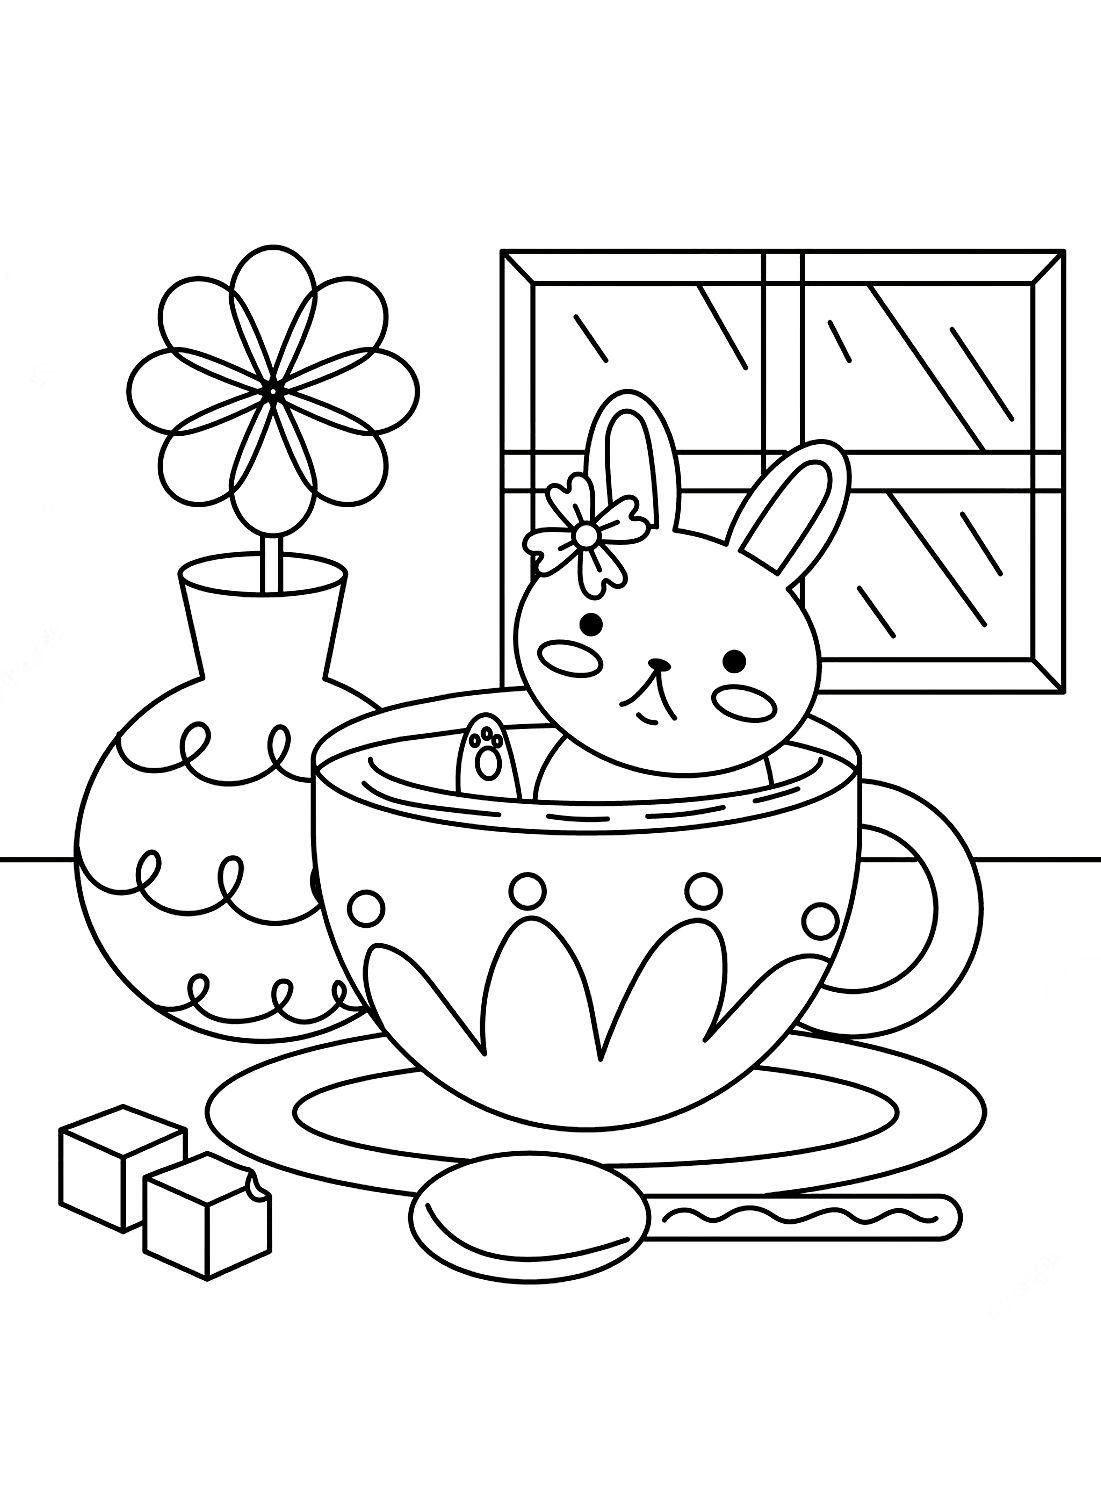 Cute coloring pictures